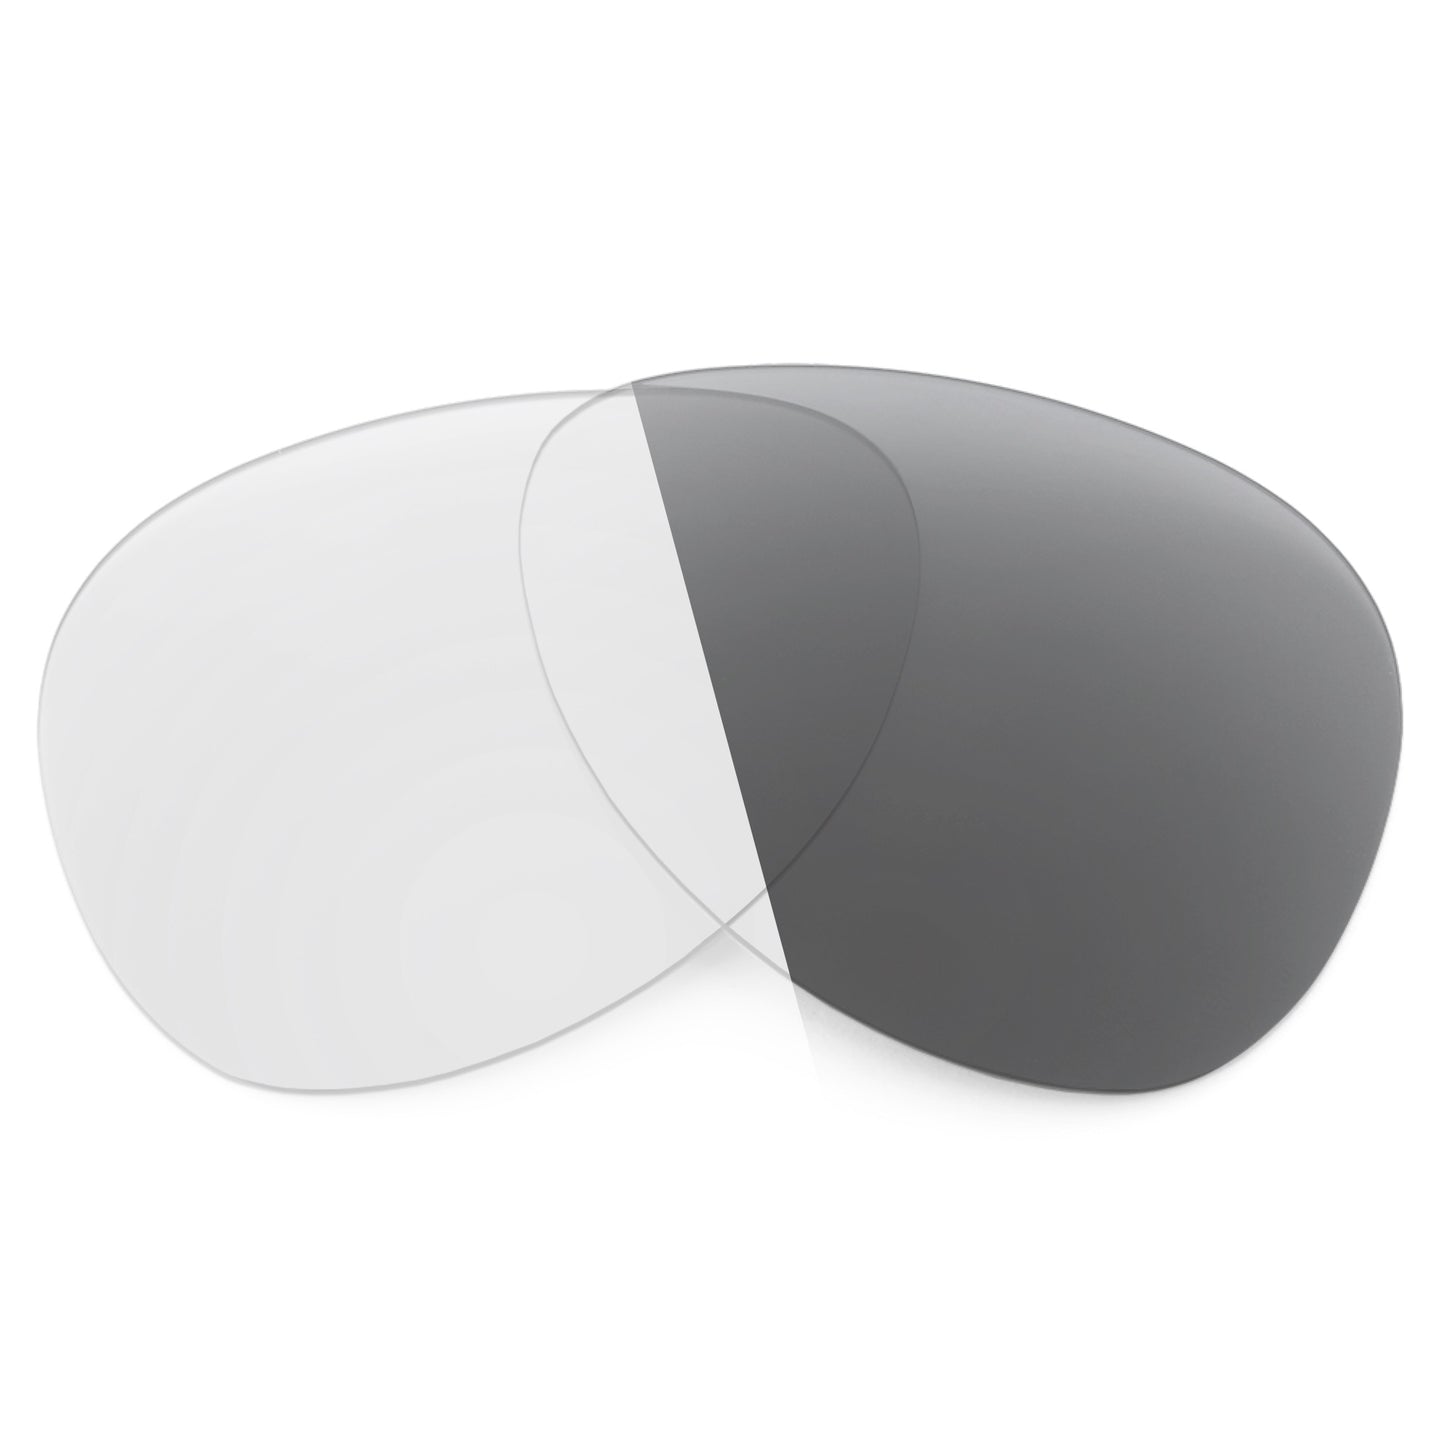 Revant replacement lenses for Ray-Ban Jackie Ohh RB4101 58mm Non-Polarized Adapt Gray Photochromic